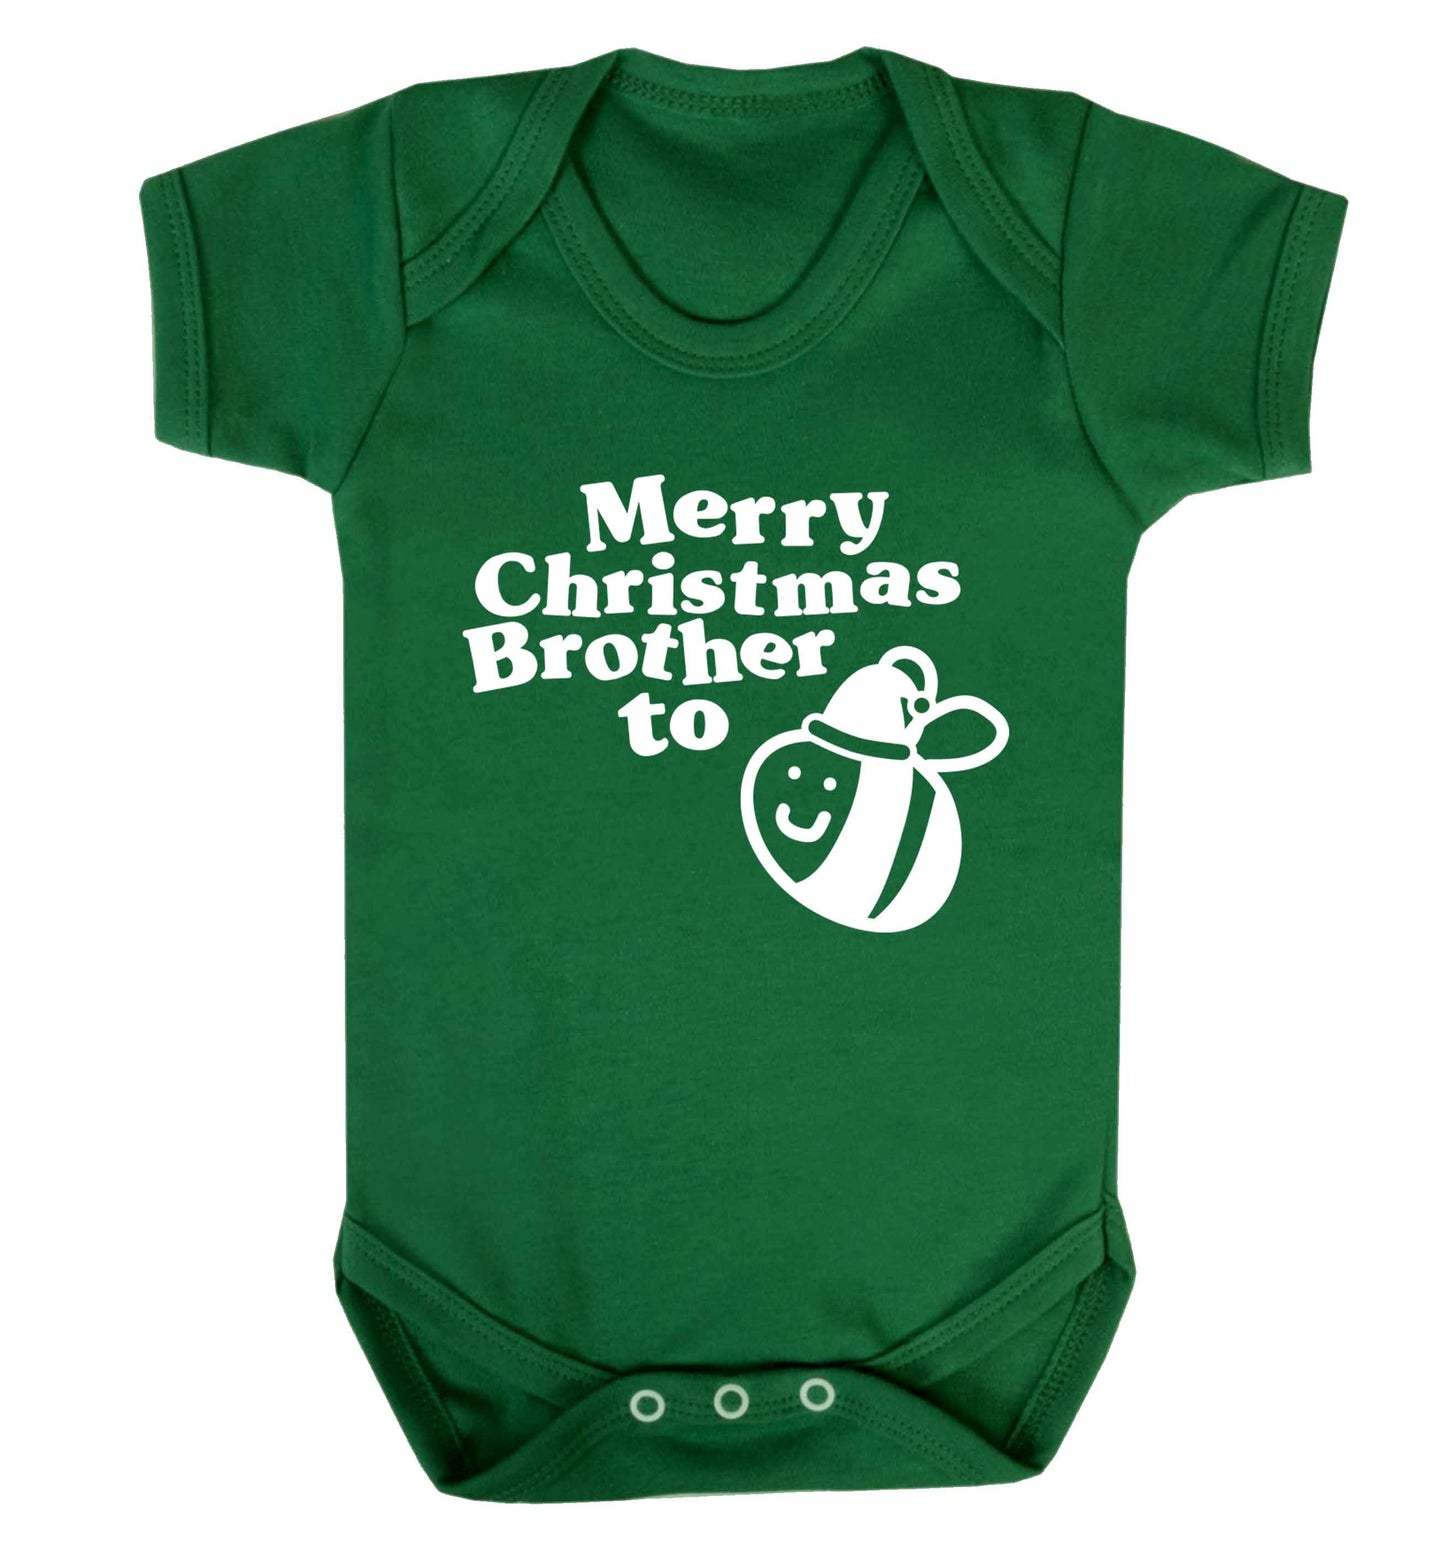 Merry Christmas brother to be Baby Vest green 18-24 months